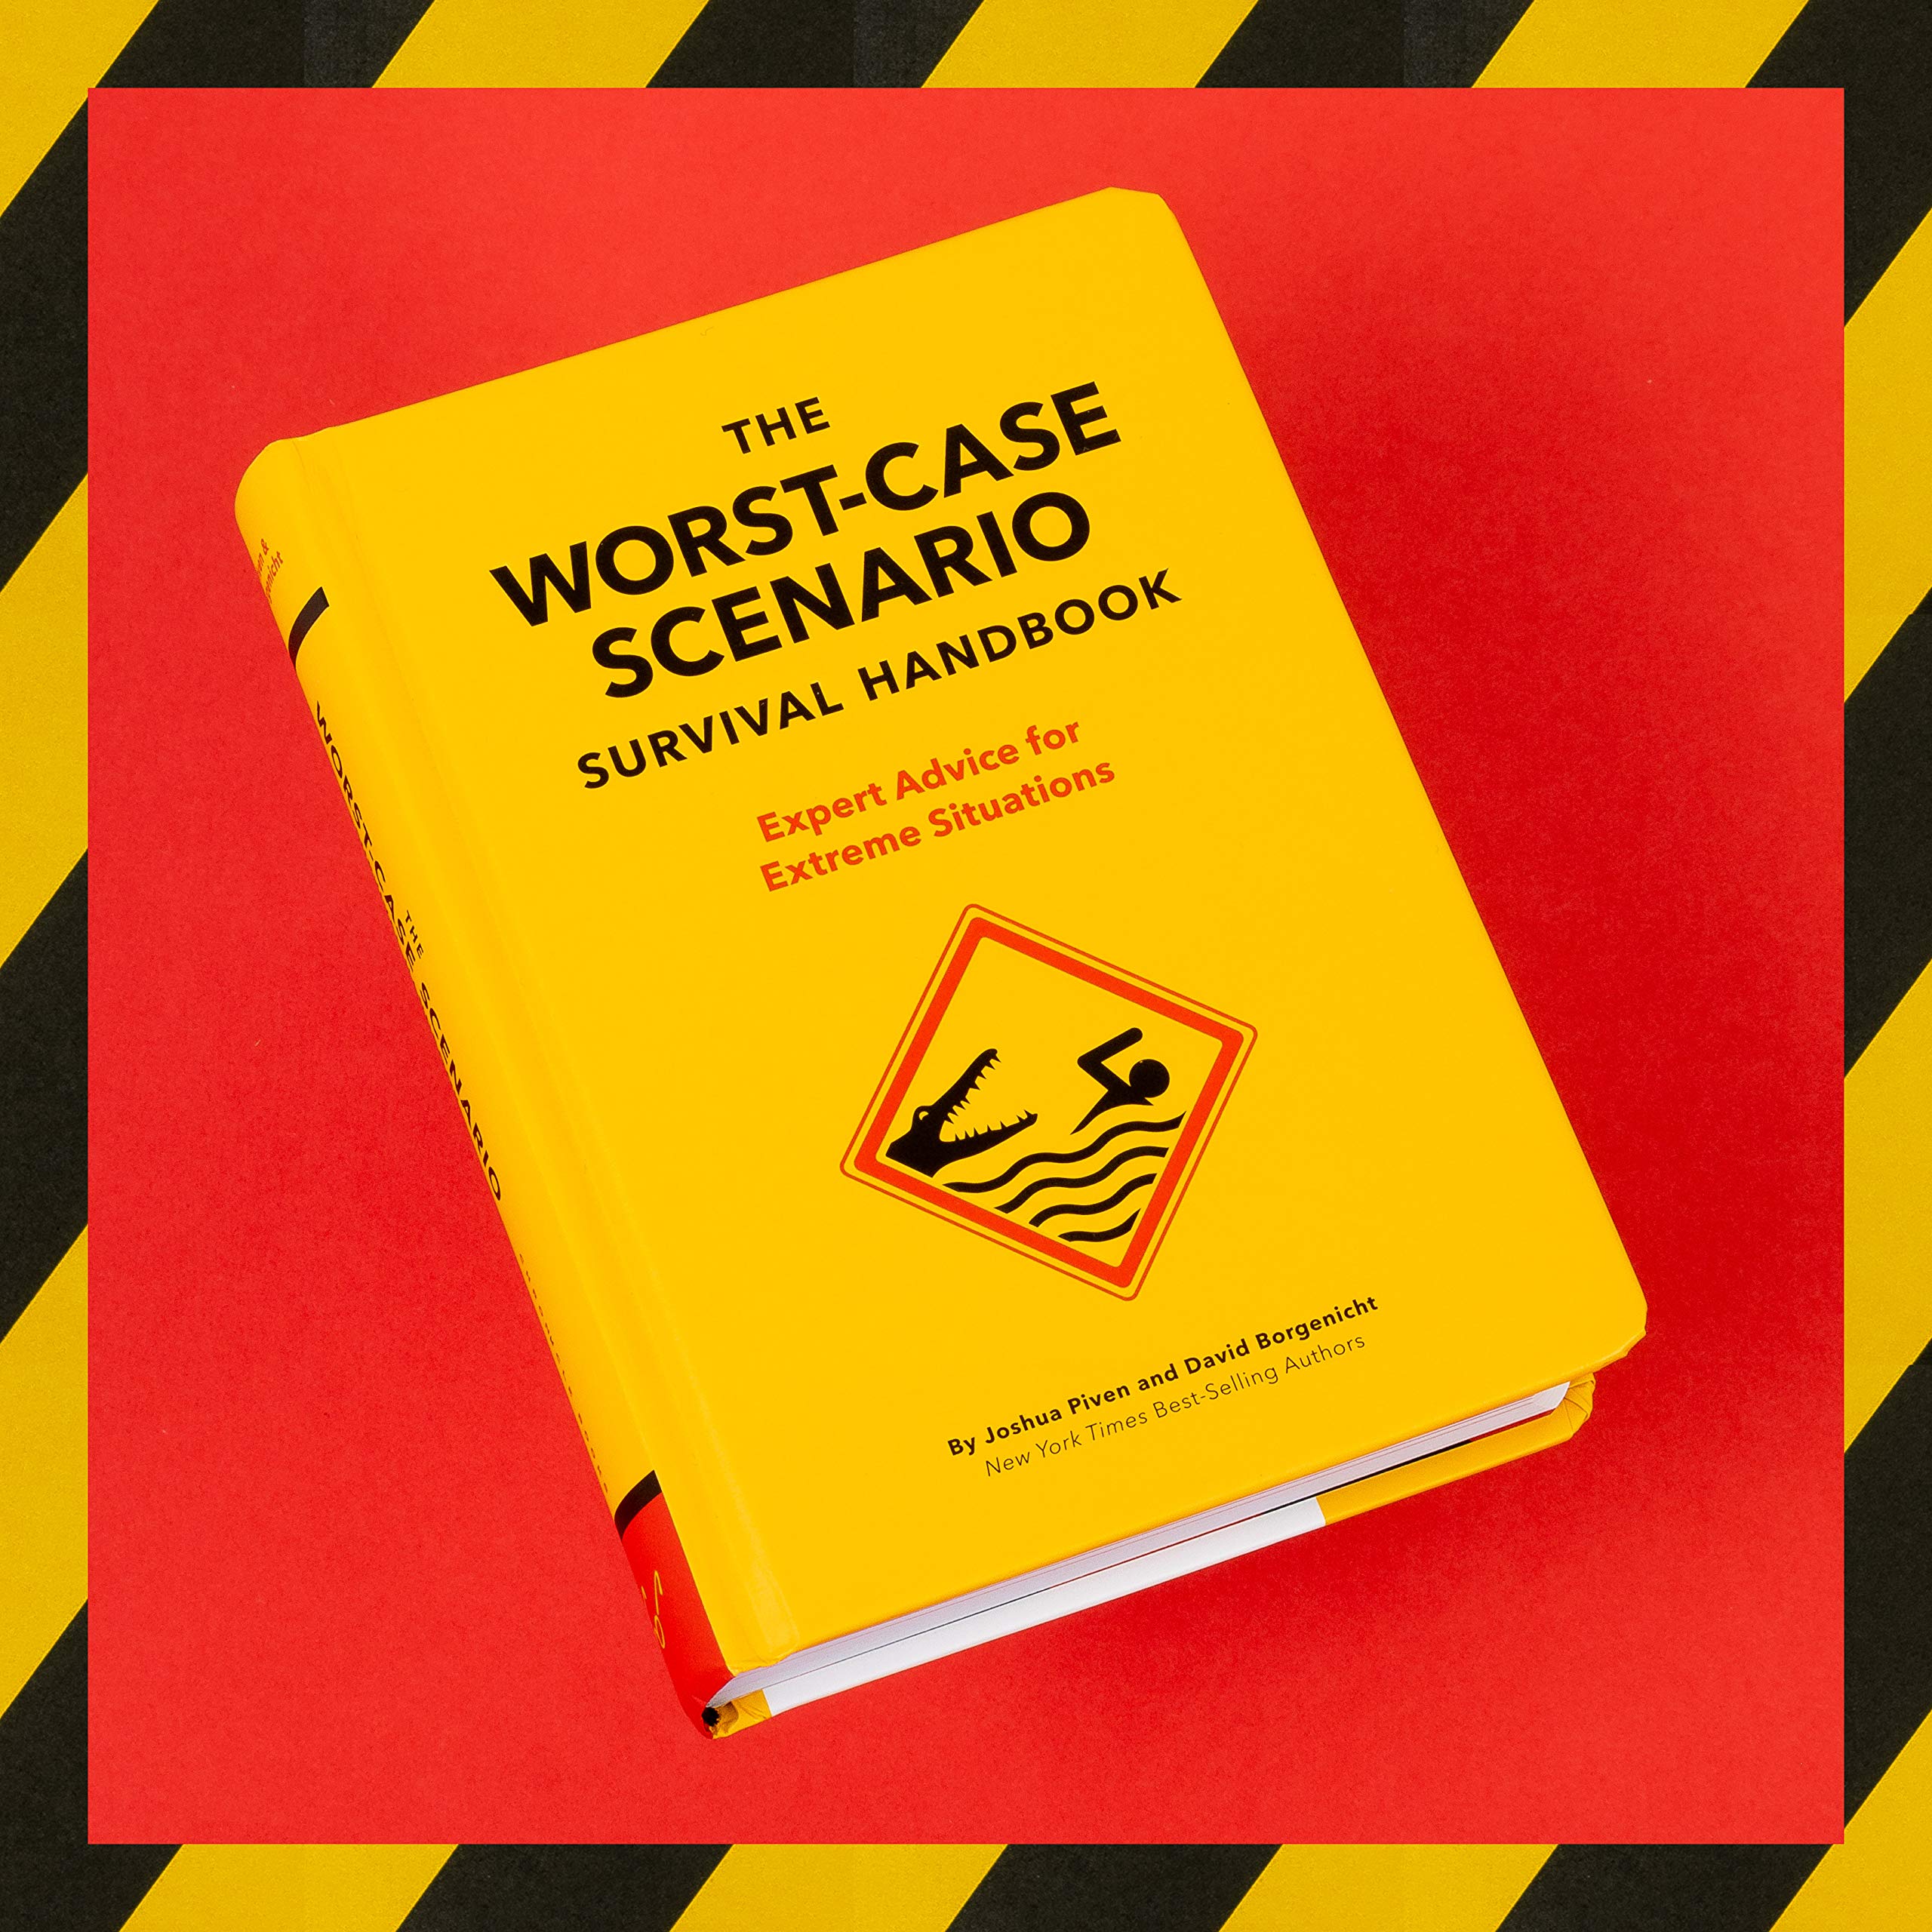 The Worst-Case Scenario Survival Handbook: Expert Advice for Extreme Situations (Survival Handbook, Wilderness Survival Guide, Funny Books): Expert Advice for Extreme Situations